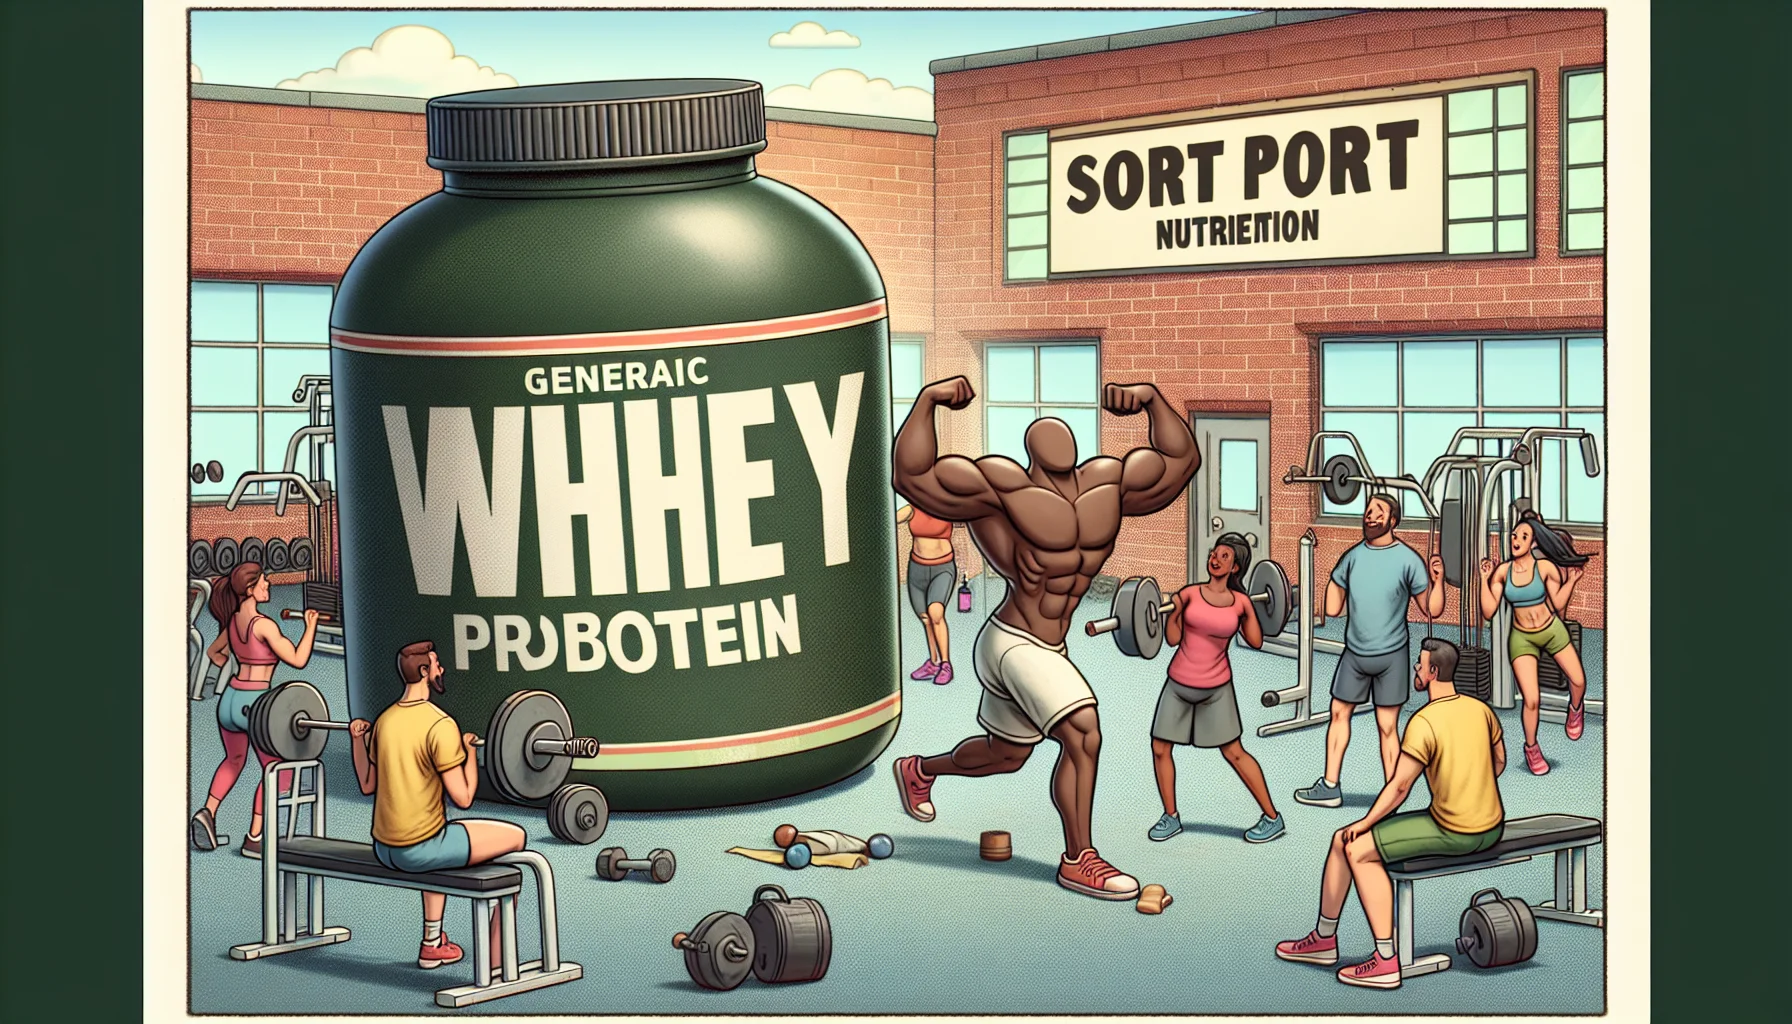 Craft a whimsical scene of a sport setting where a sizeable tub of generic whey protein supplement is playfully portrayed. The location is a bustling gym. People of diverse descents like Caucasian, Hispanic, and Black are involved, each person engaging in different types of fitness exercises – strength training, cardio, yoga. Suddenly, a tub of whey protein supplement grows limbs and starts doing squats amidst their bemusement and laughter. This funny scenario emphasizes the importance of supplements in sports nutrition, thus enticing viewers to consider using them in their fitness regimen.